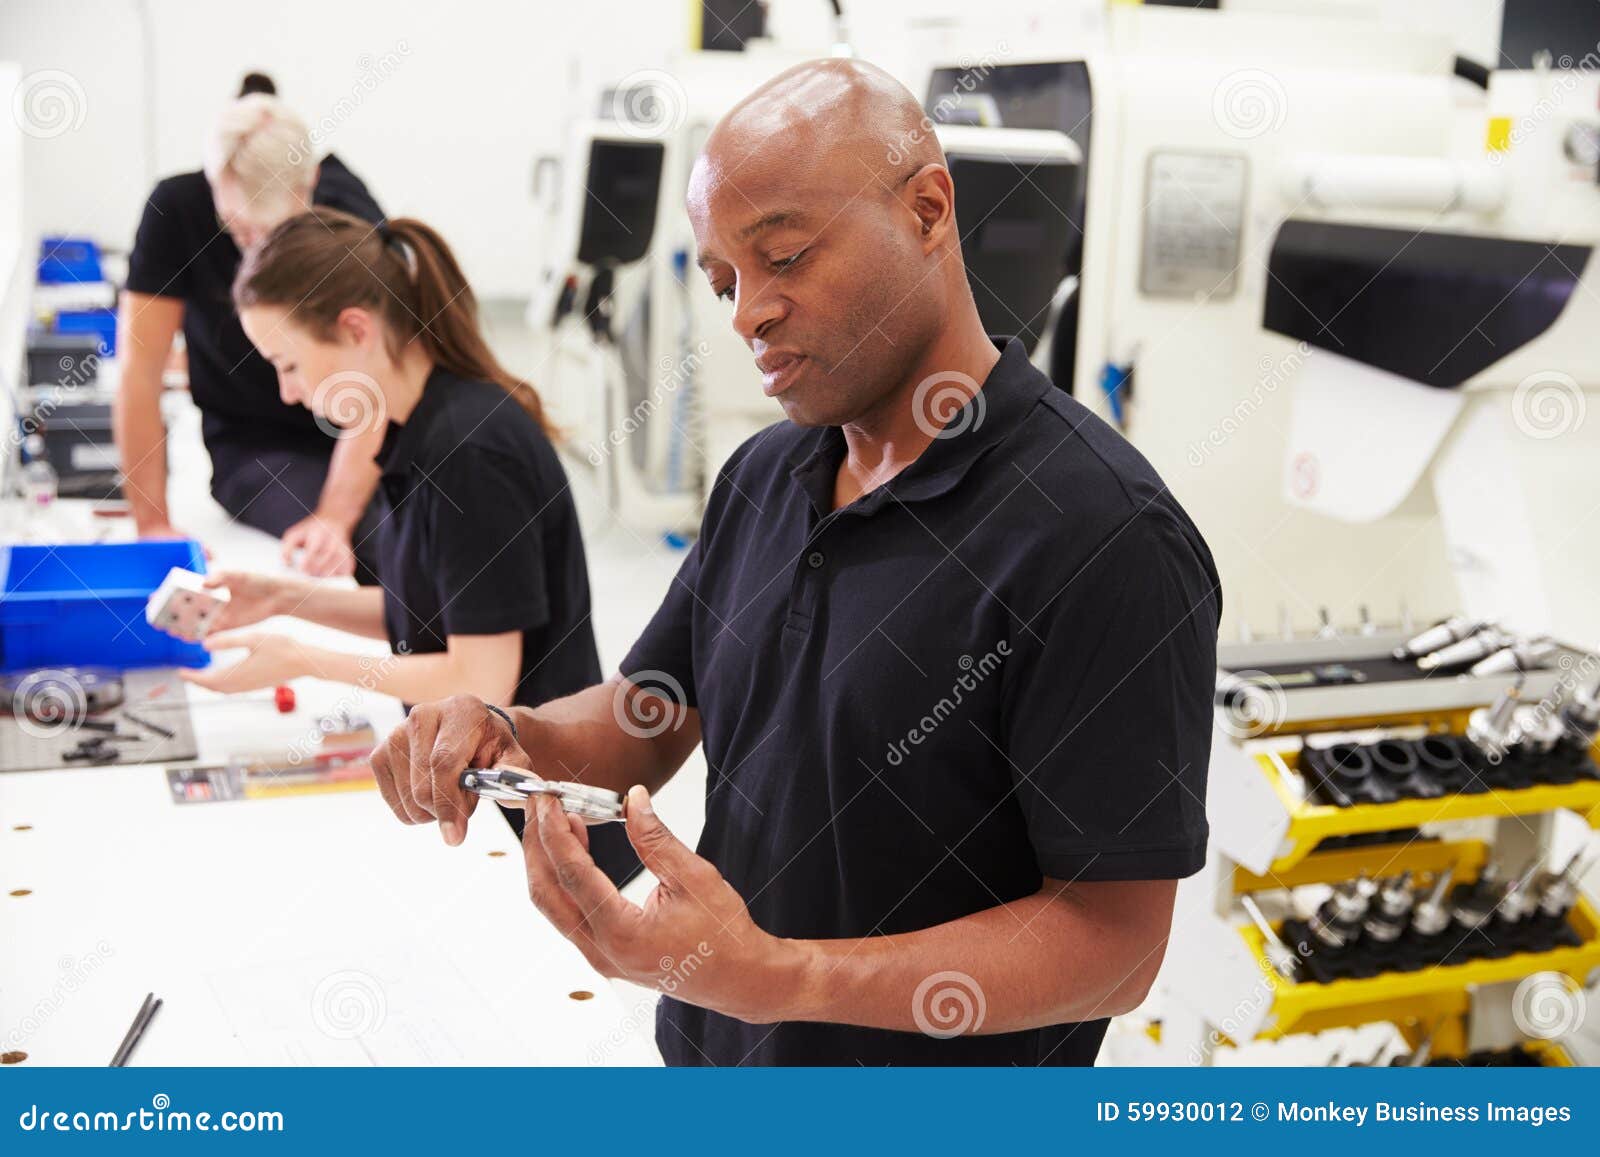 workers in engineering factory checking component quality